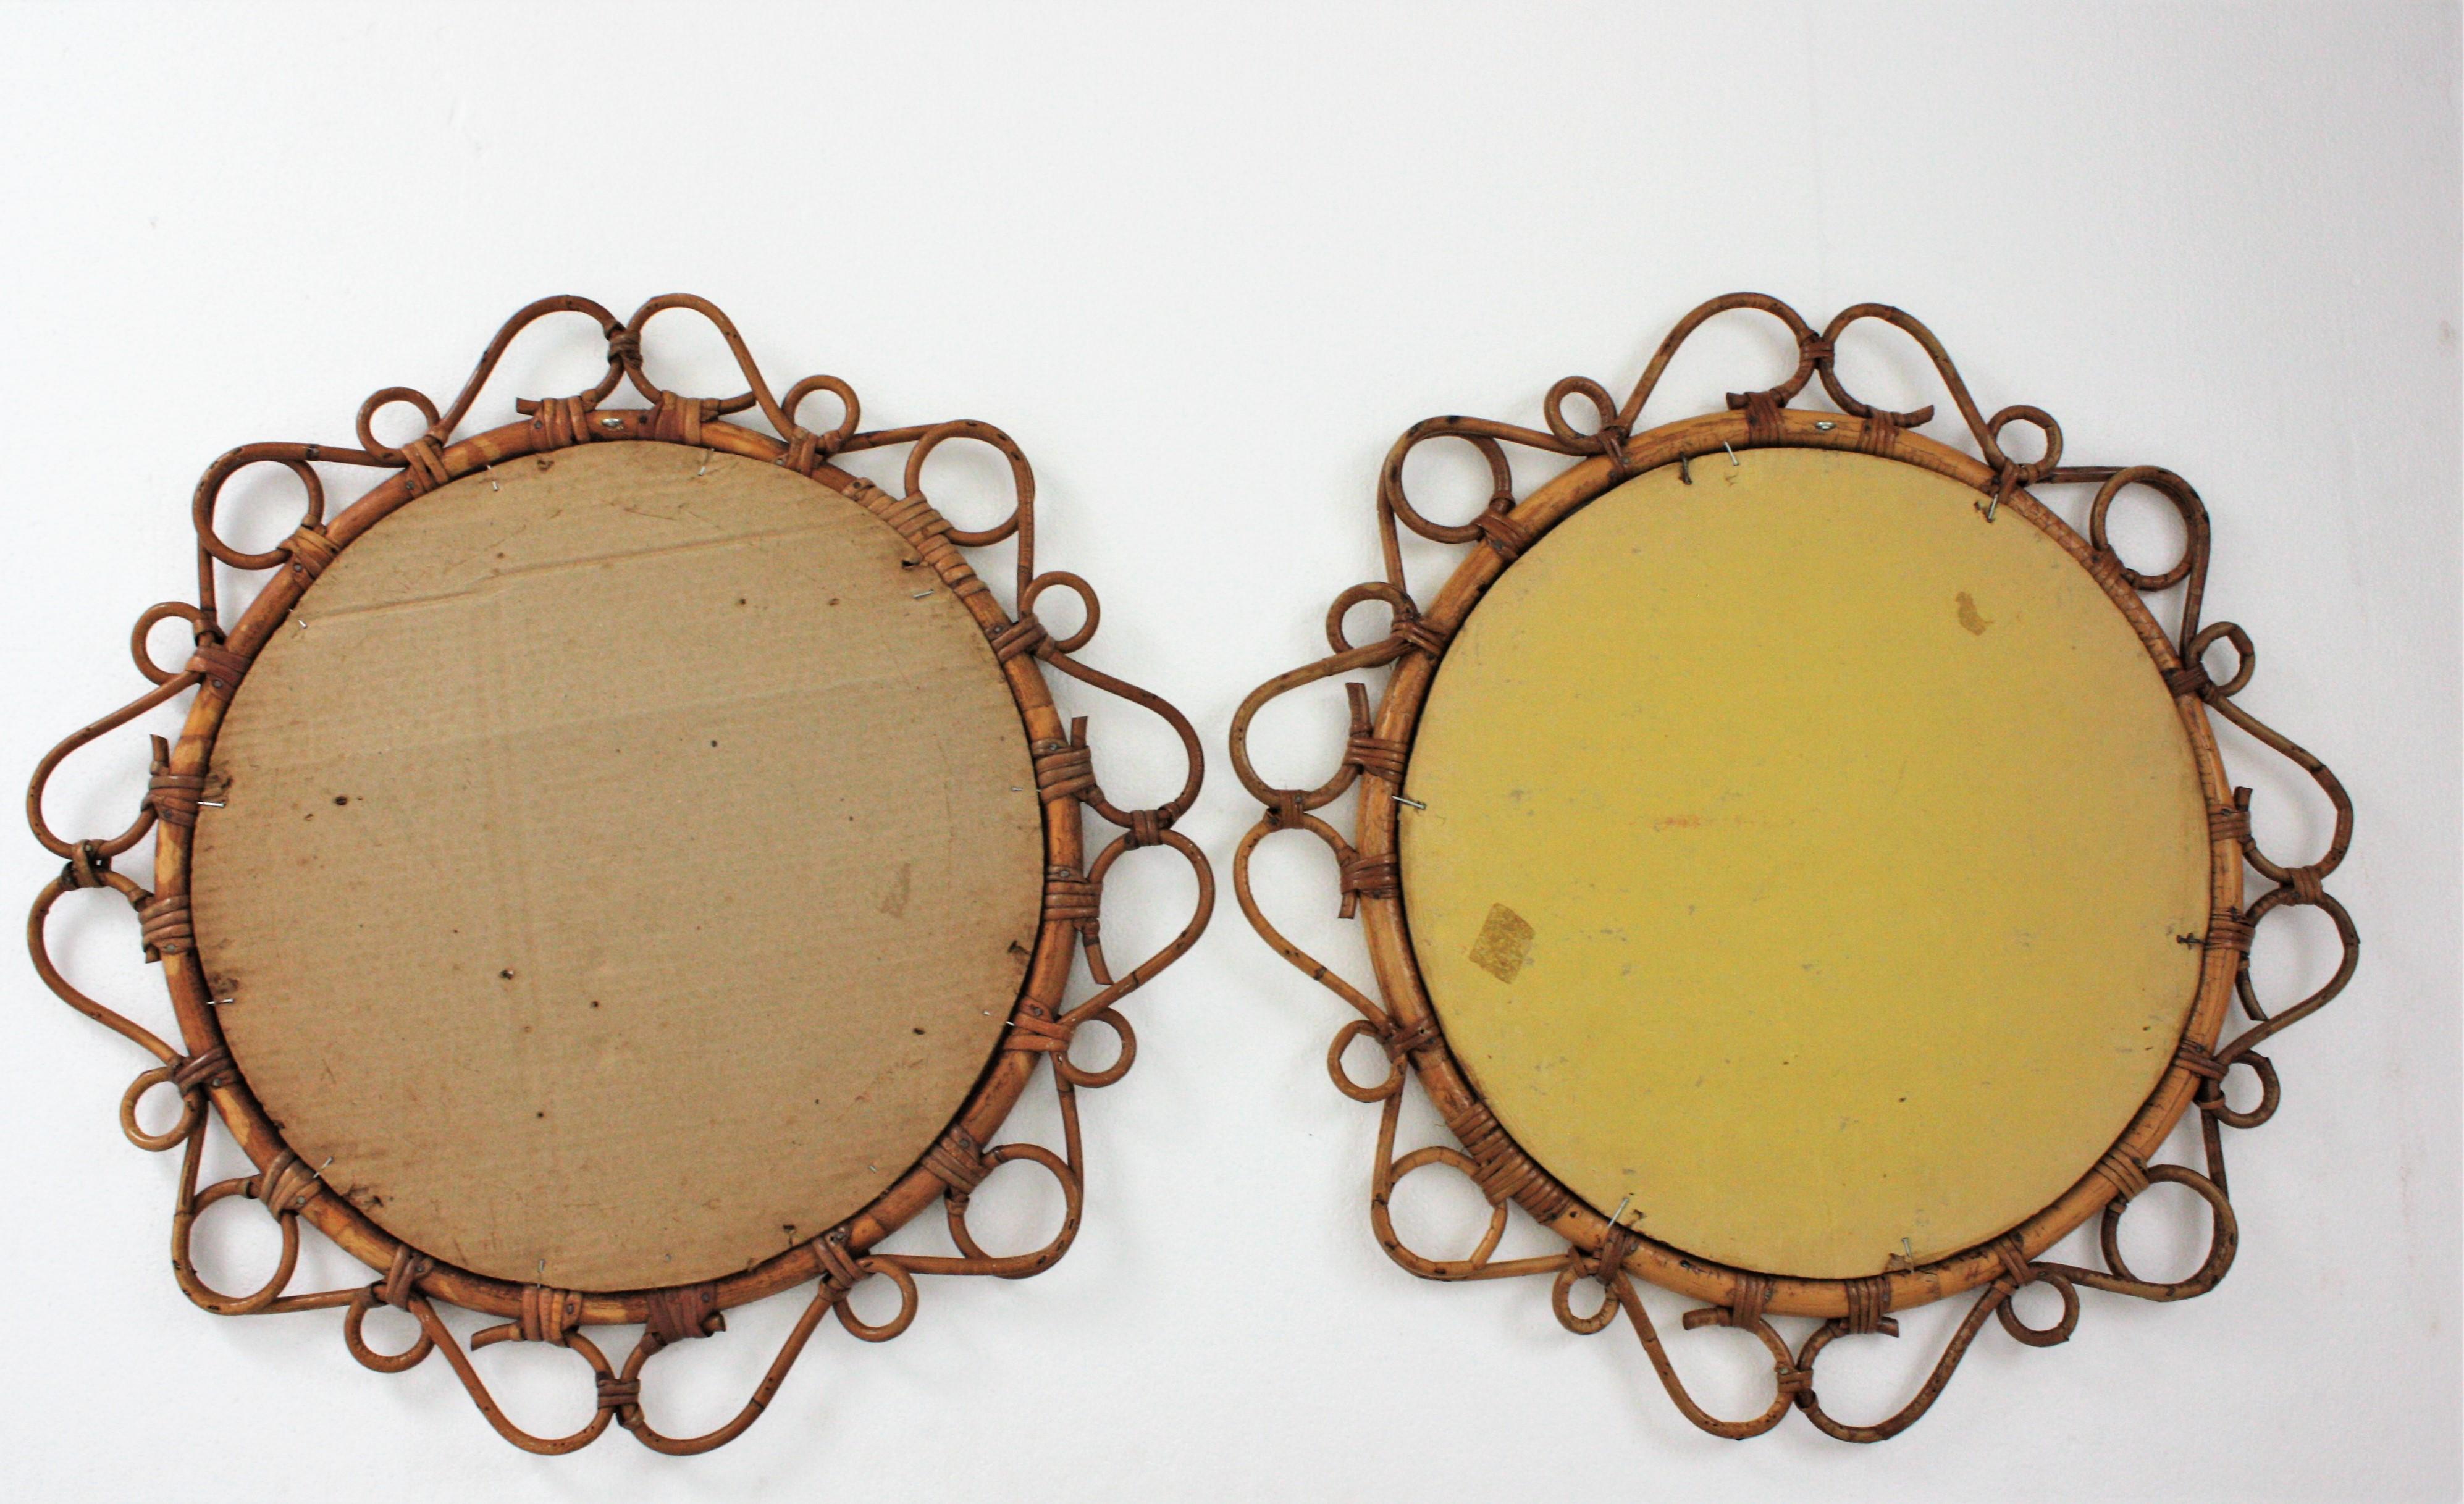 20th Century Rattan Round Mirrors with Scroll Details, Pair